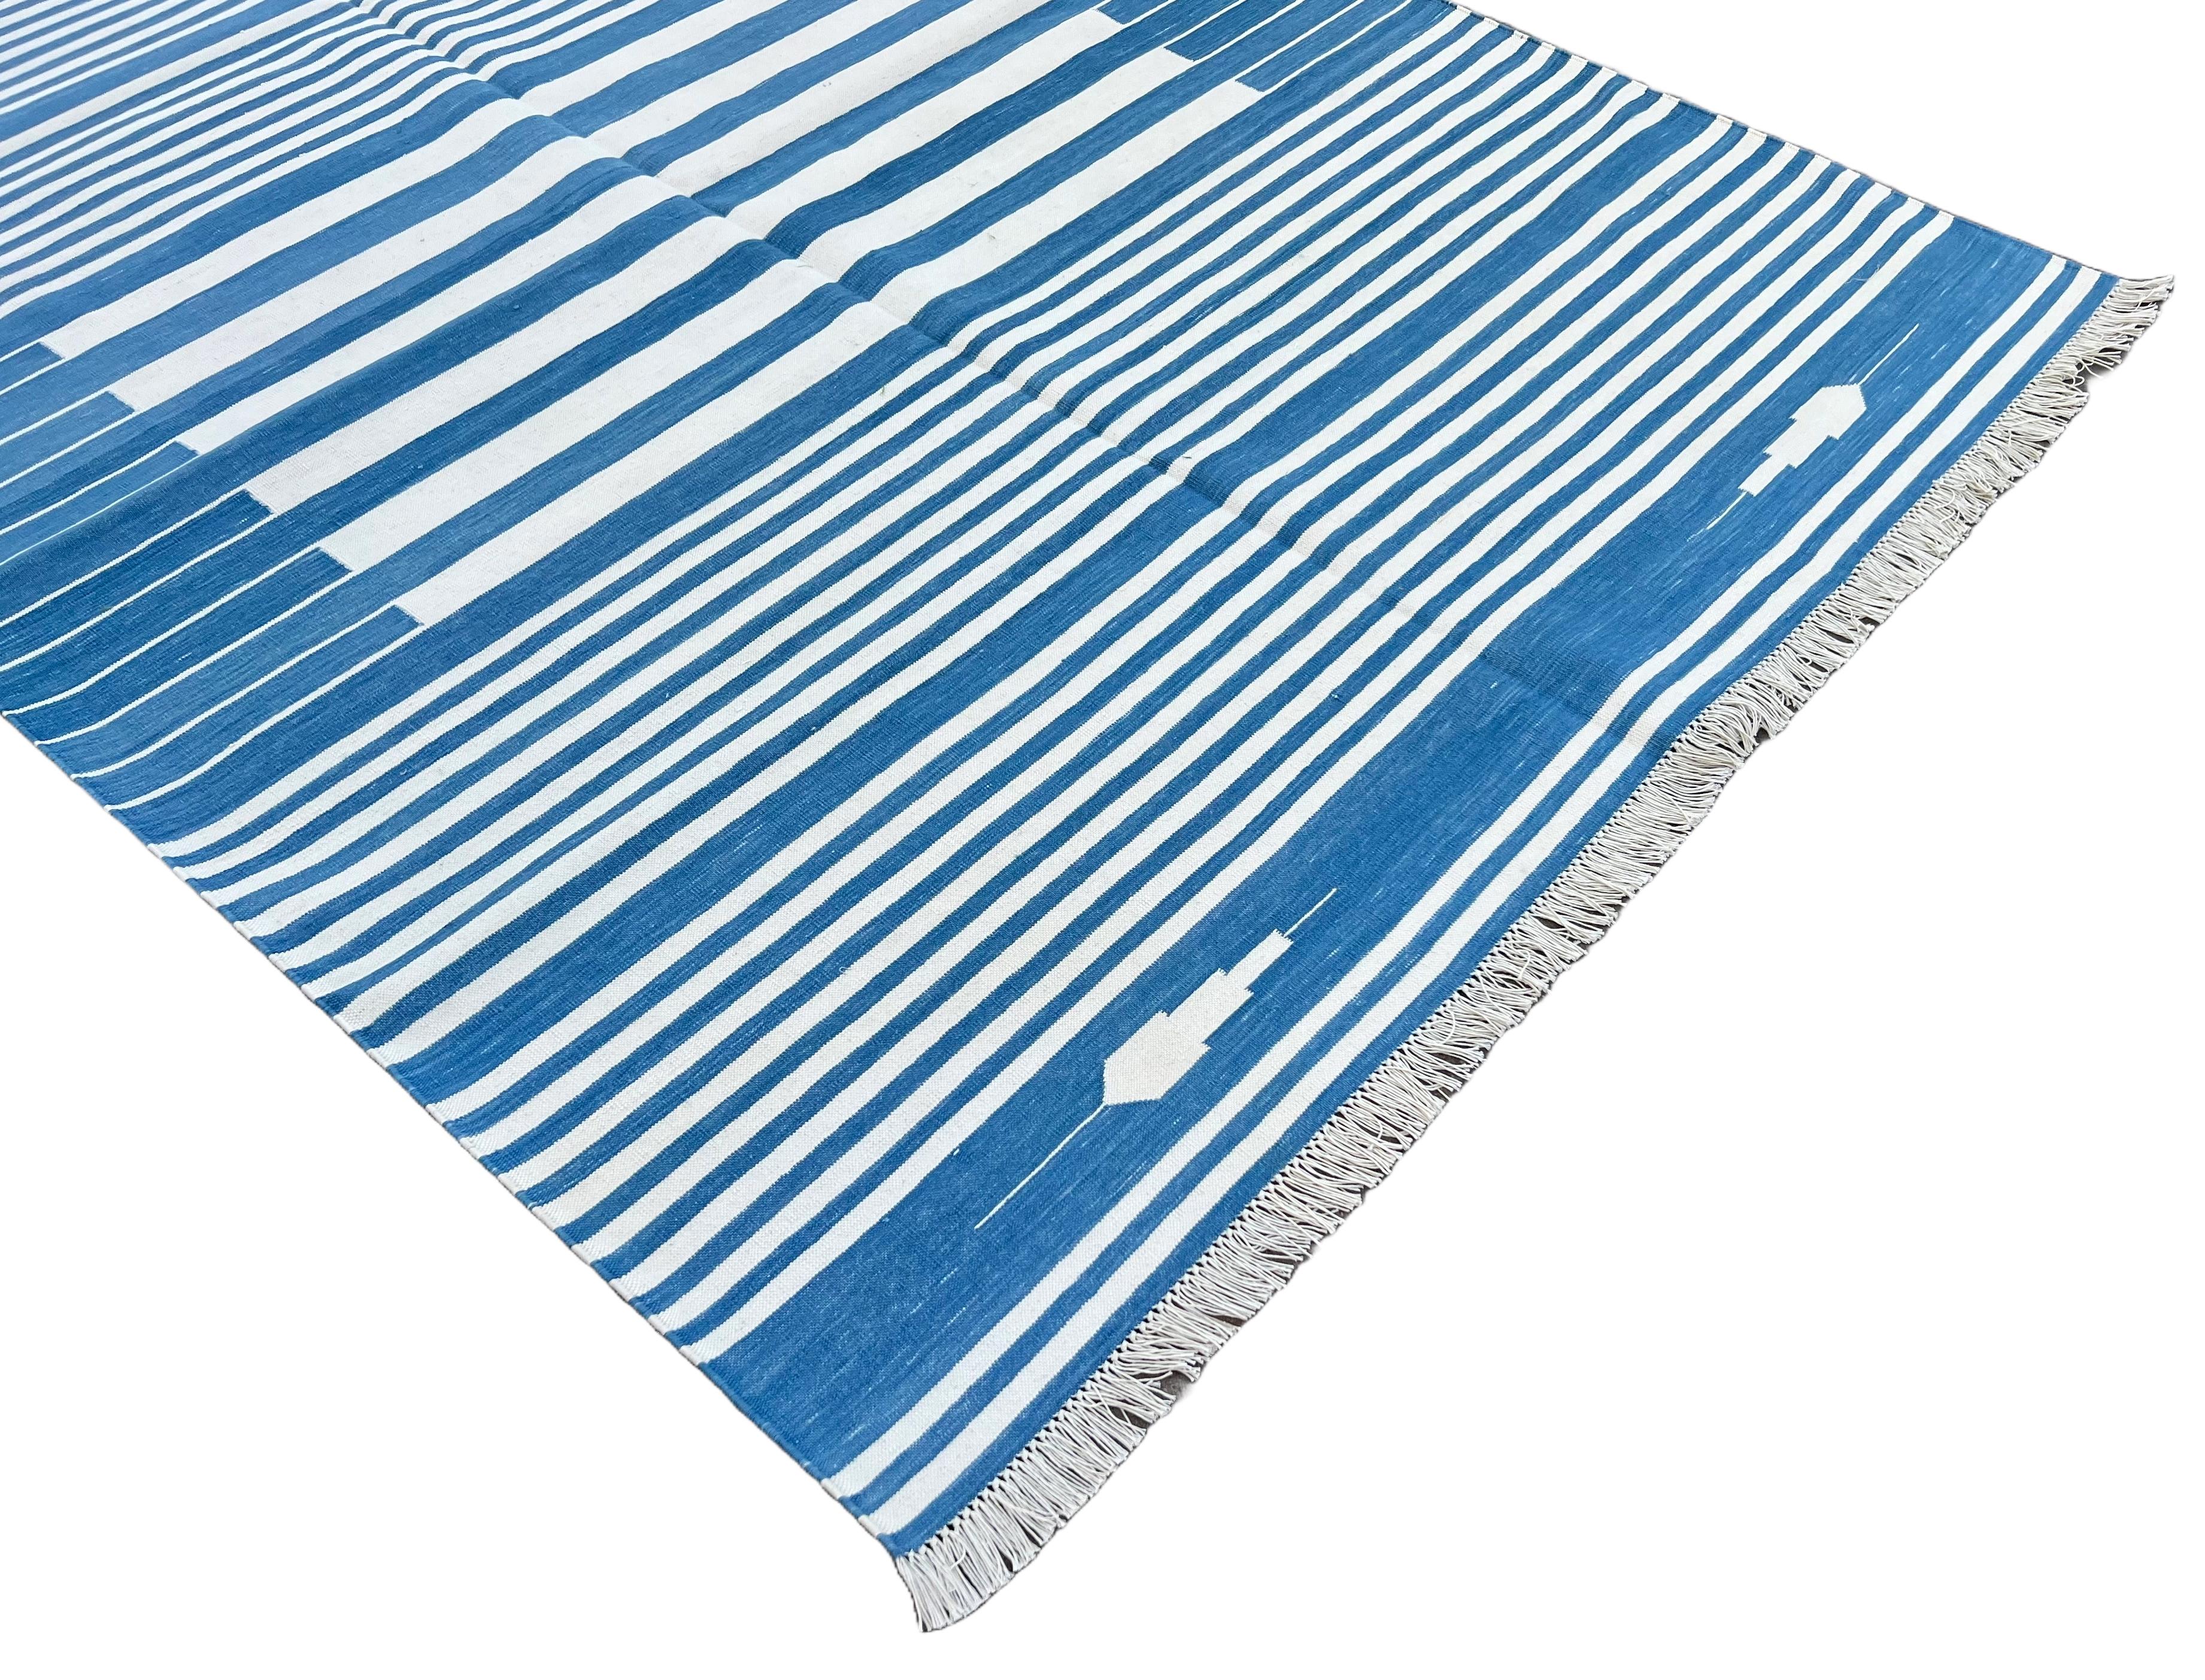 Hand-Woven Handmade Cotton Area Flat Weave Rug, 5x7 Blue And White Striped Indian Dhurrie For Sale